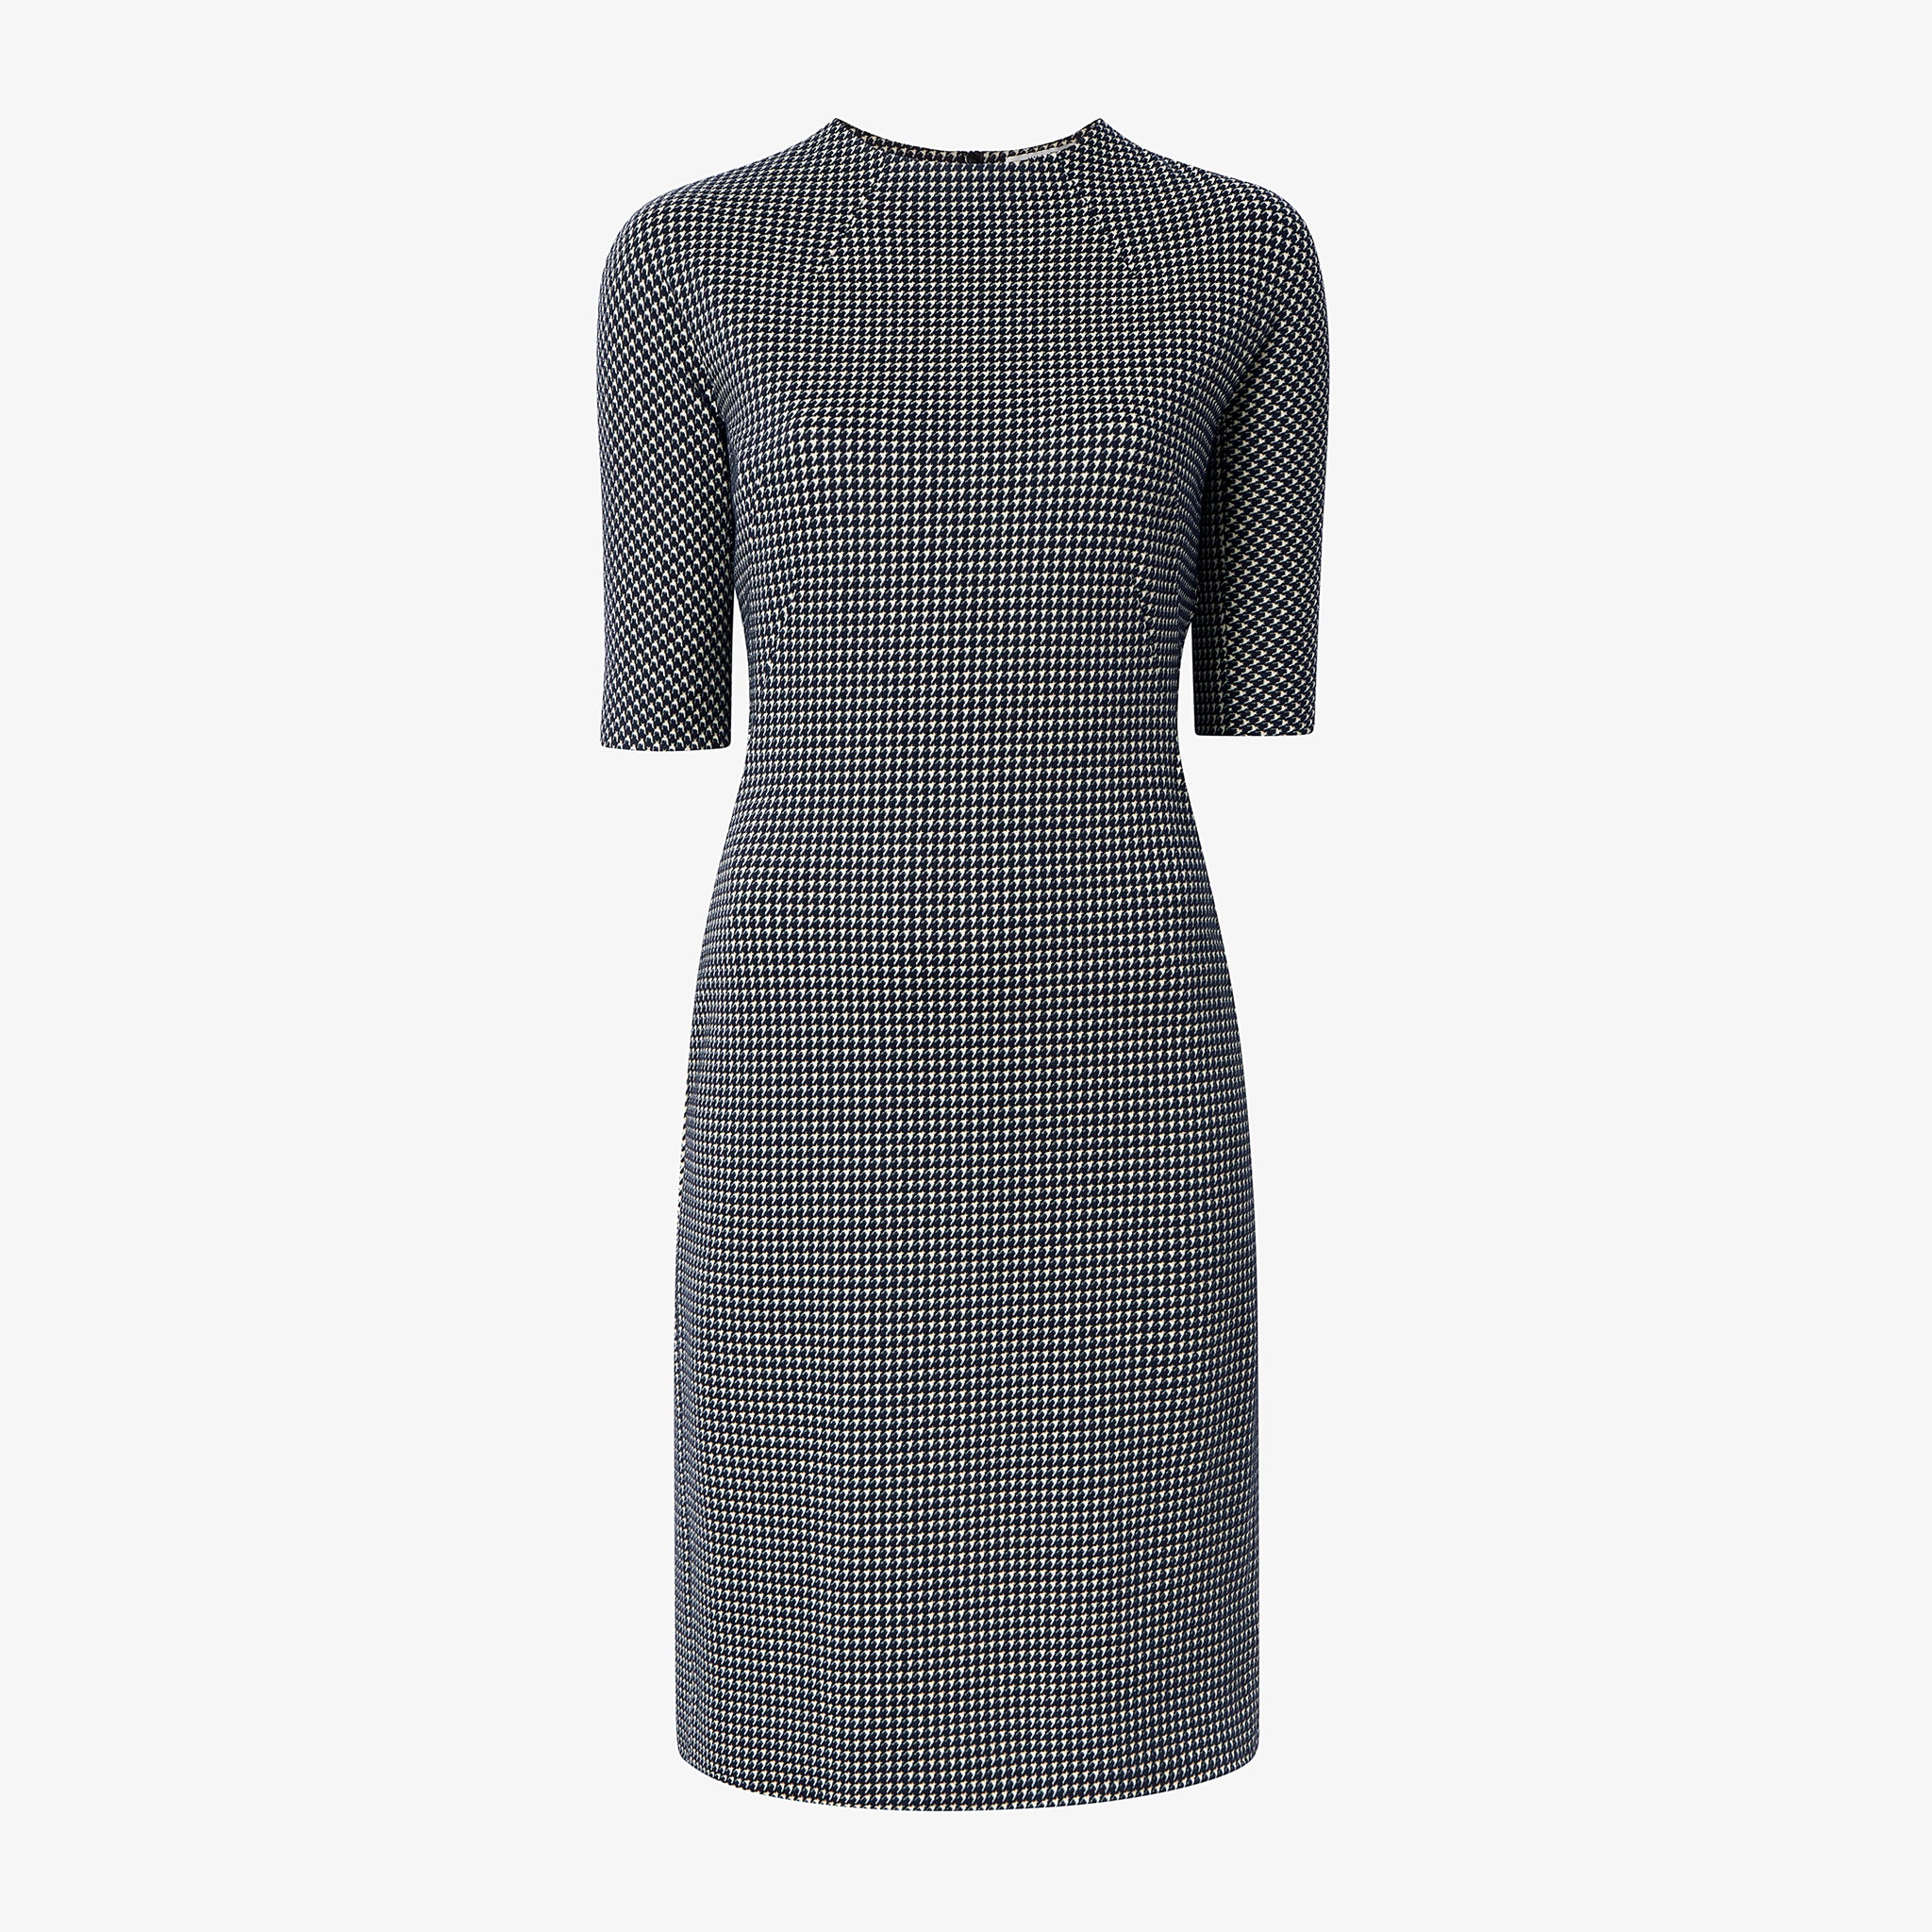 Packshot image of the farnoosh dress in black and white houndstooth